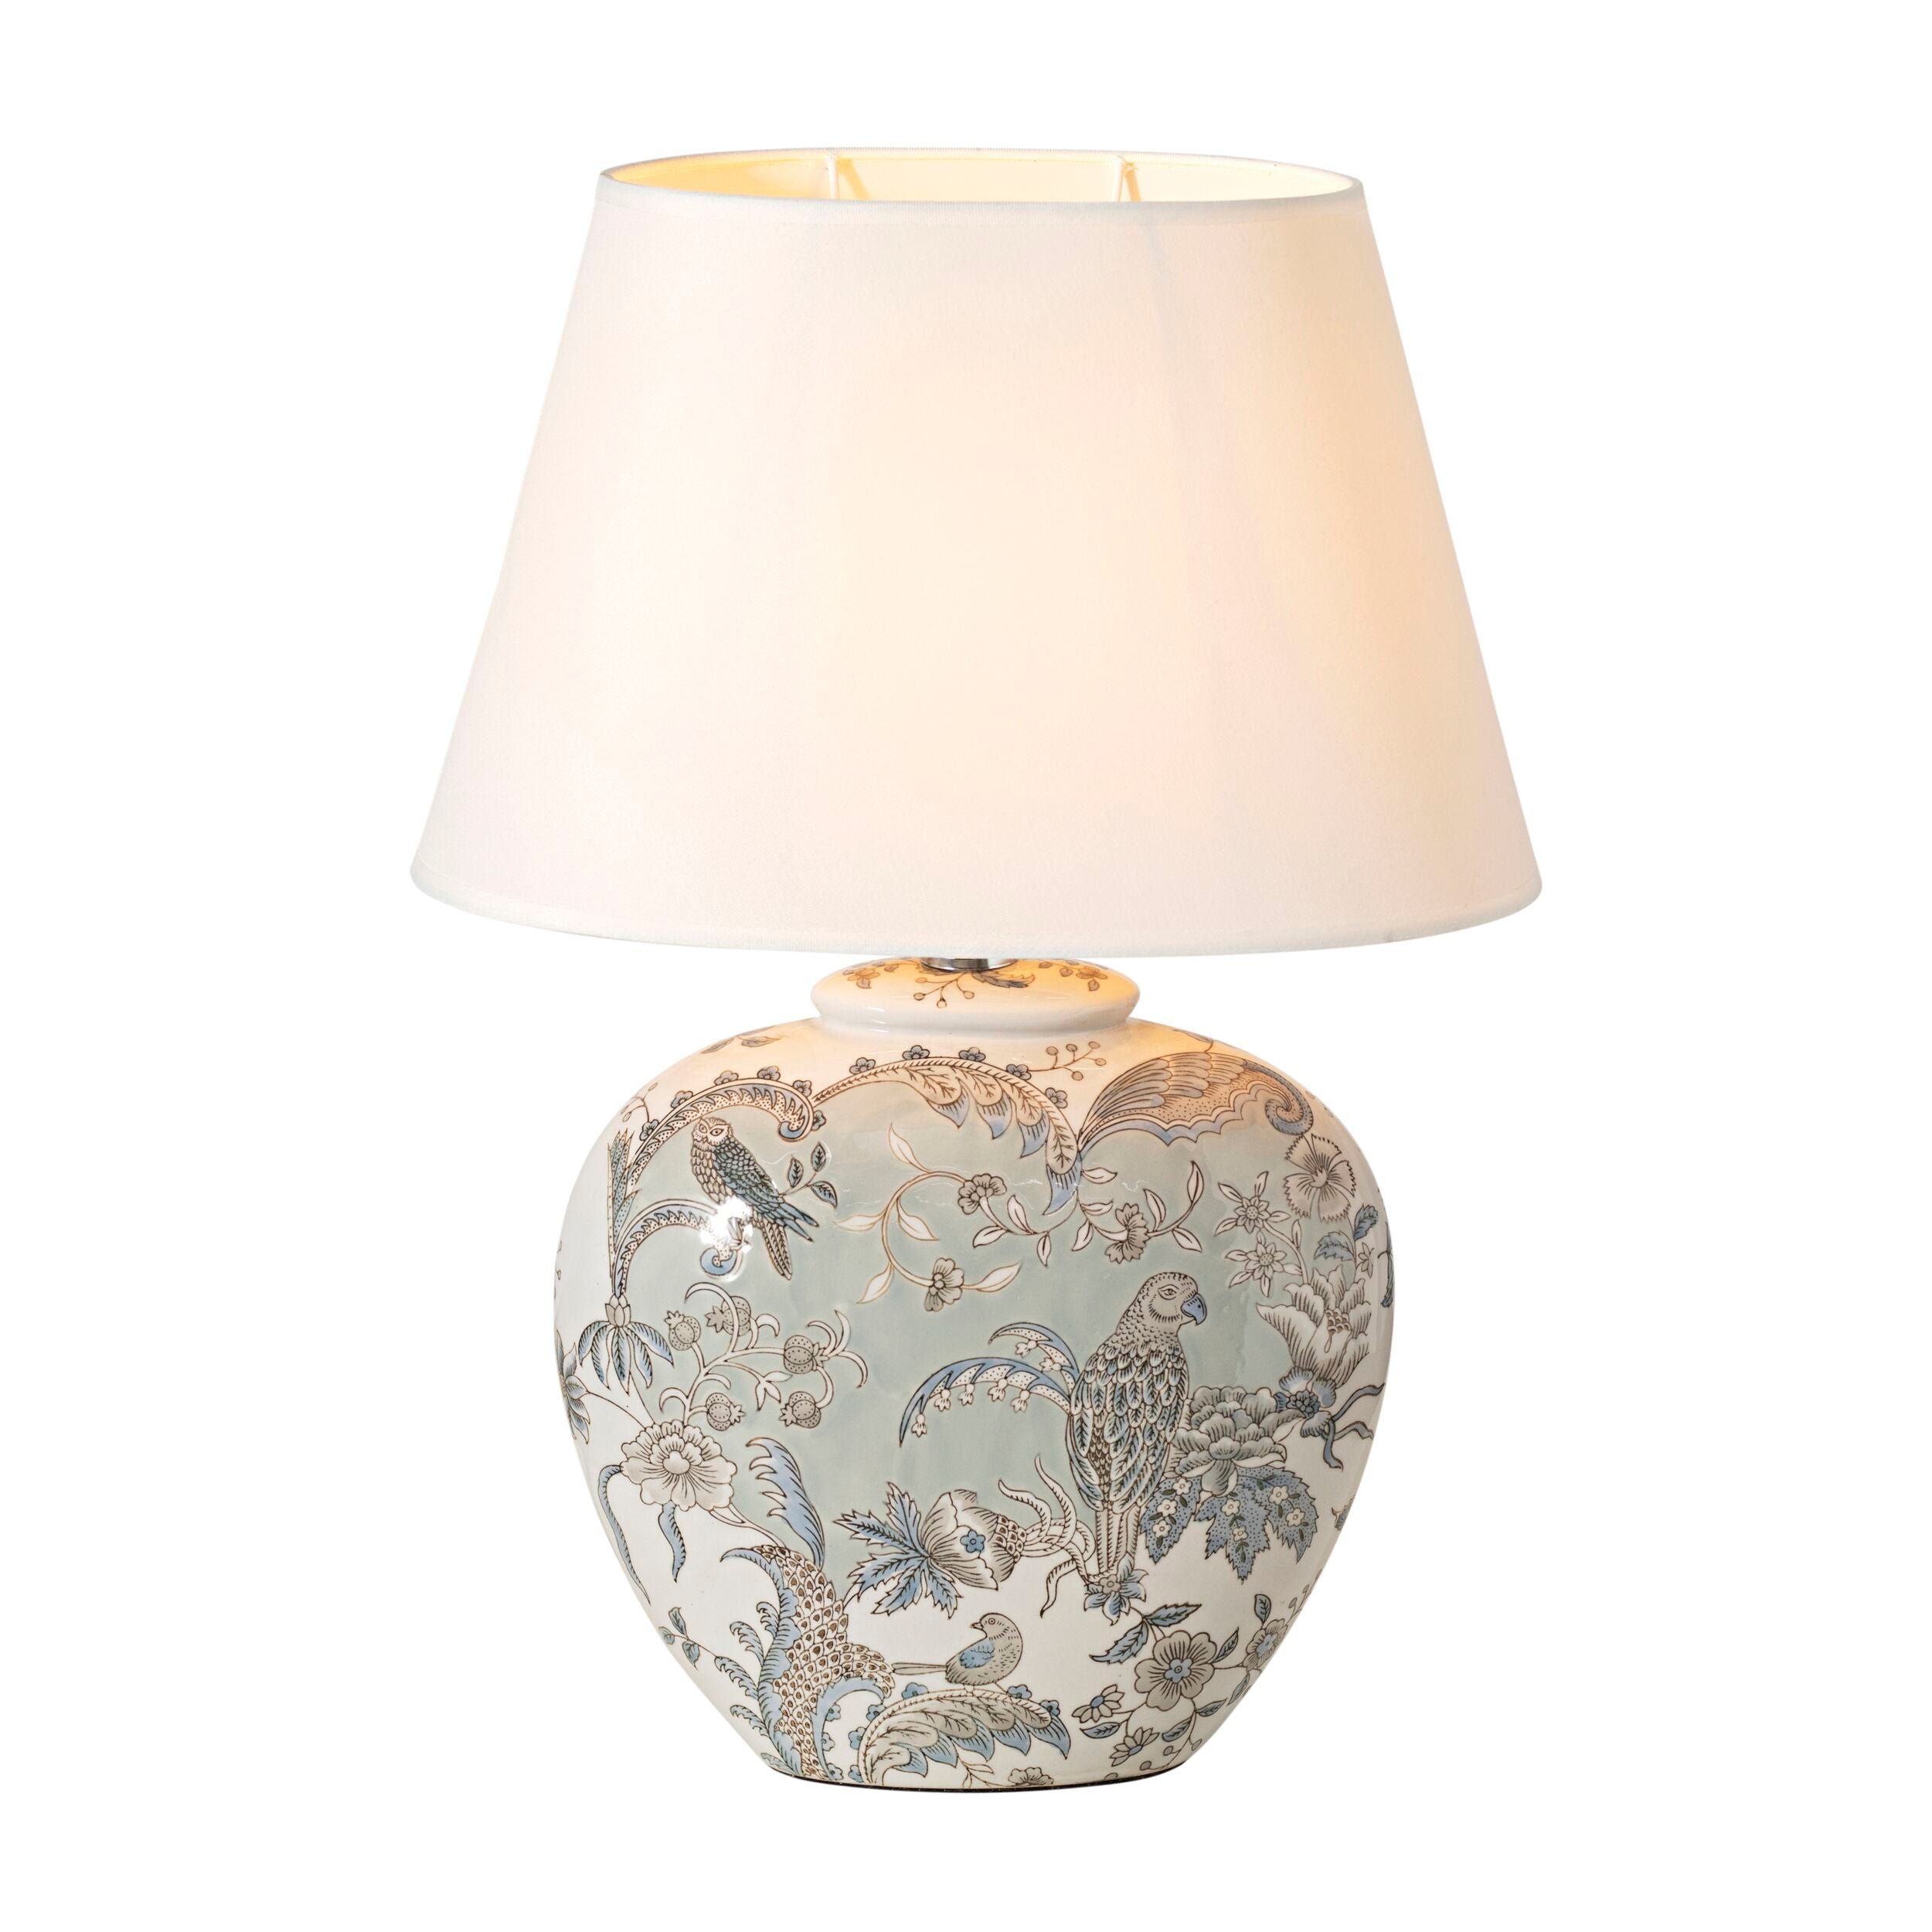 Pale Blue Birds In The Sky Table Lamp 65cm